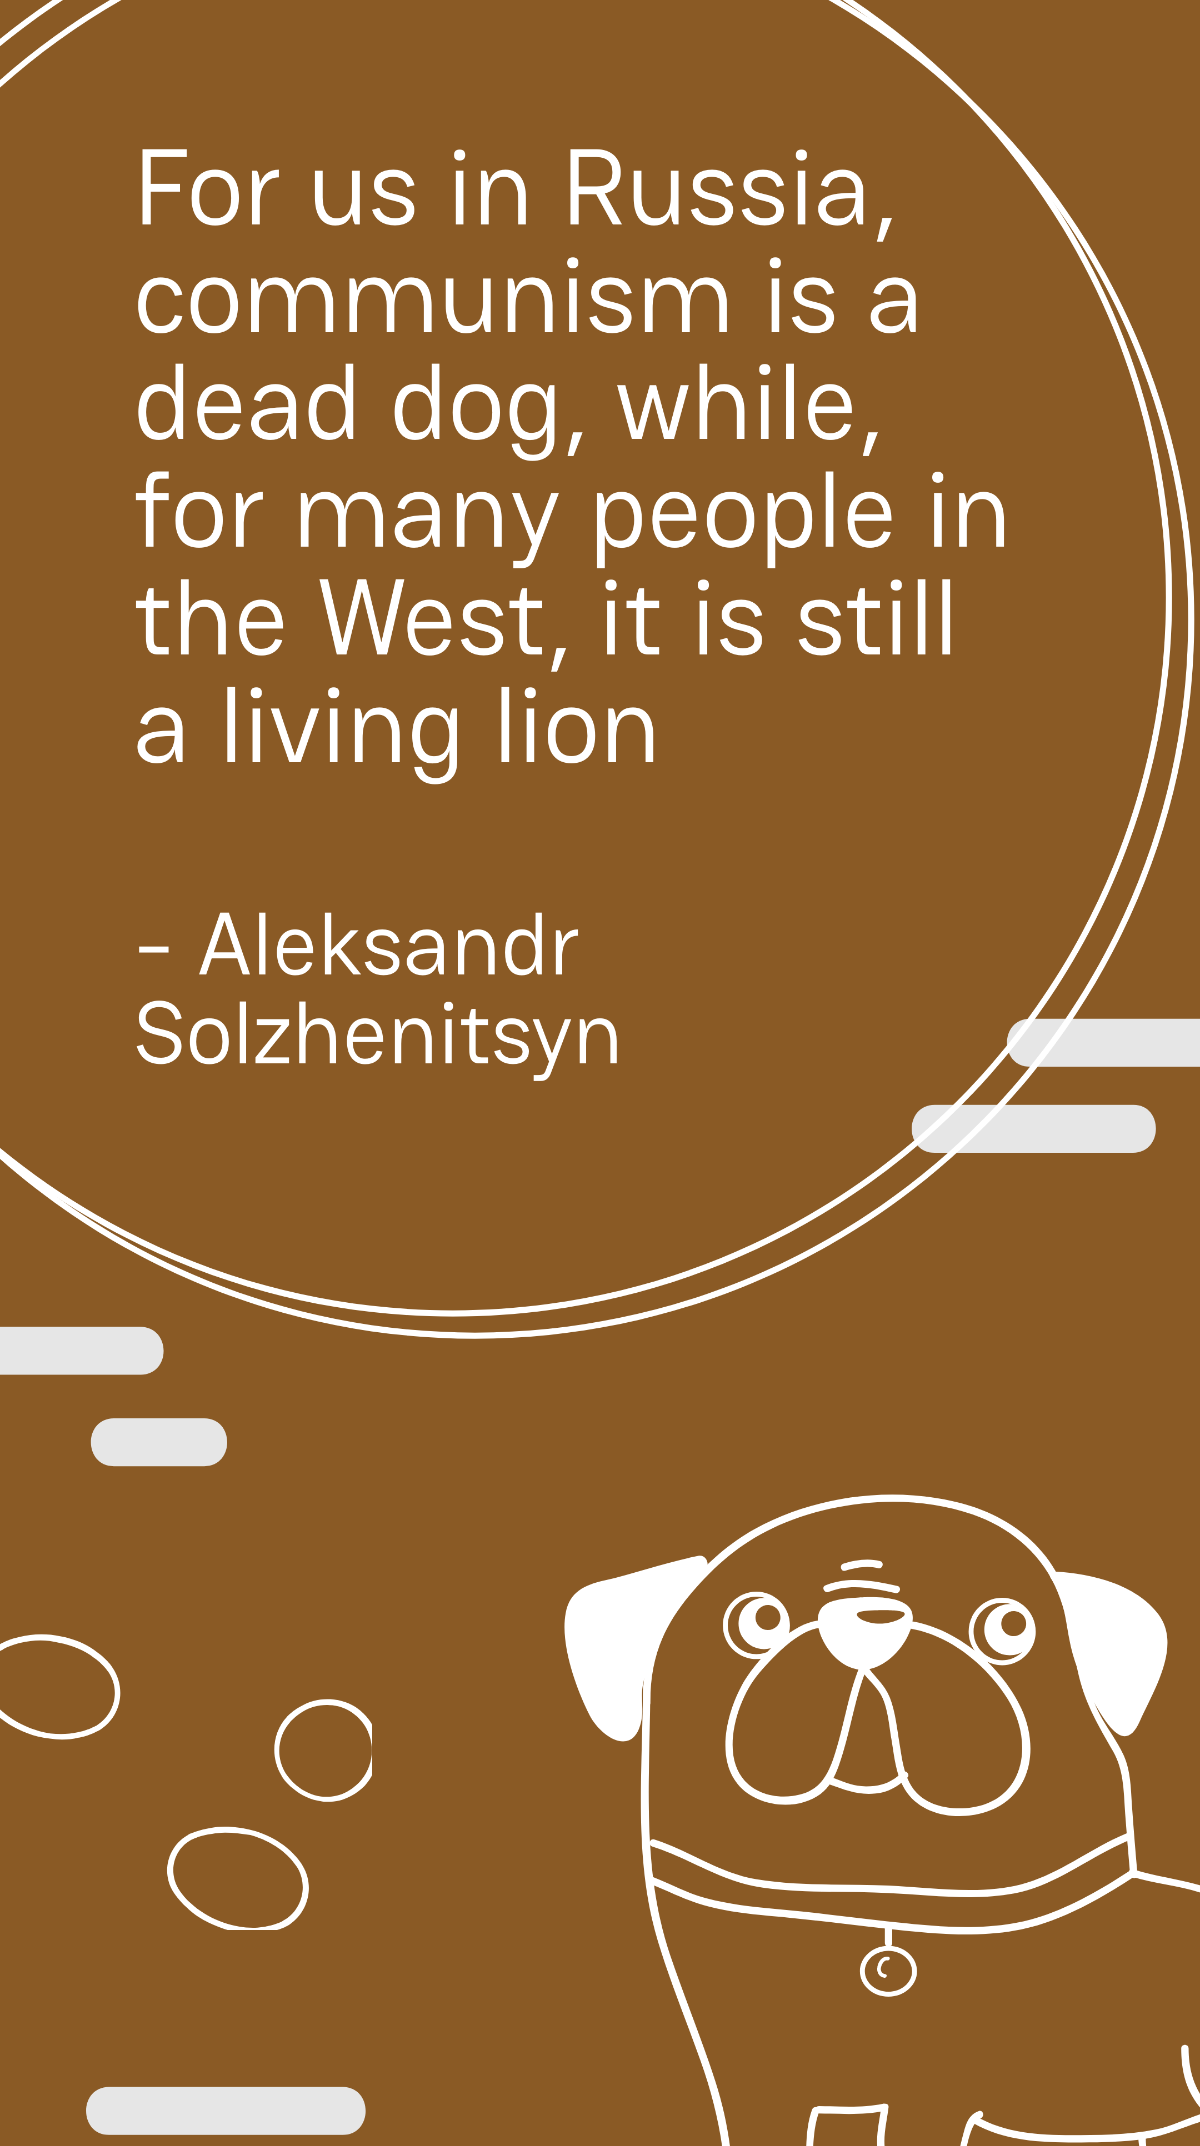 Aleksandr Solzhenitsyn - For us in Russia, communism is a dead dog, while, for many people in the West, it is still a living lion Template